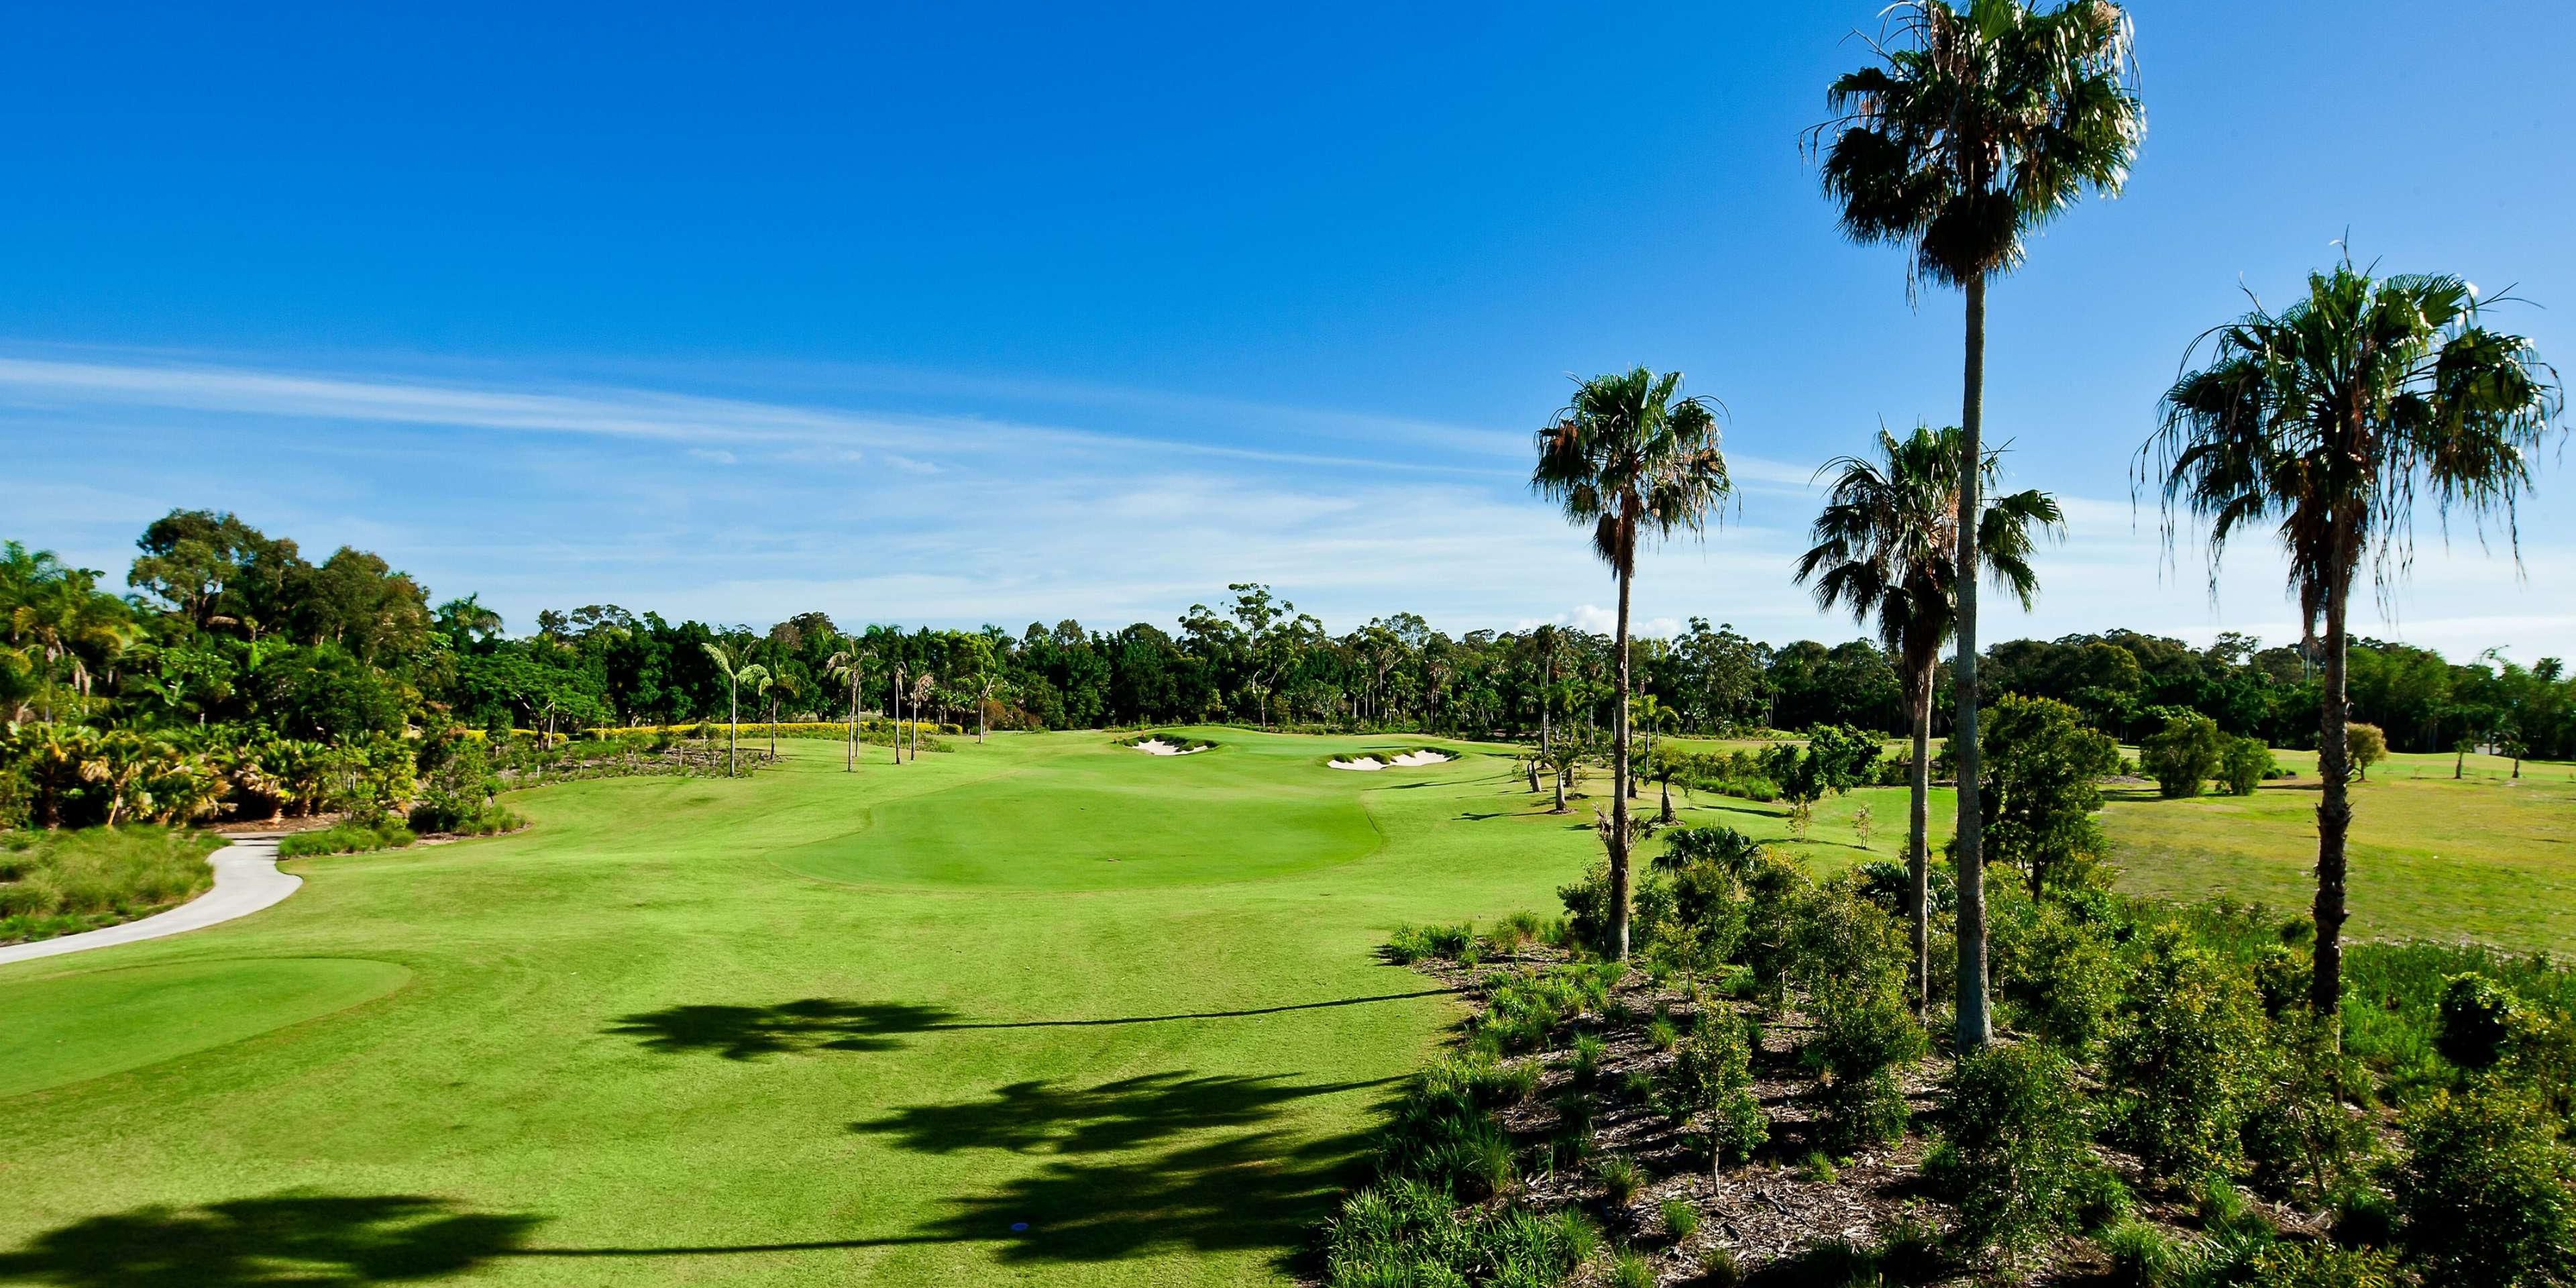 Celebrated as one of Australia’s most iconic golfing destinations, Sanctuary Cove is home to the critically acclaimed The Palms and The Pines golf courses. Both courses are exclusive to members, but guests of InterContinental Sanctuary Cove Resort enjoy access to these world-class golf courses.